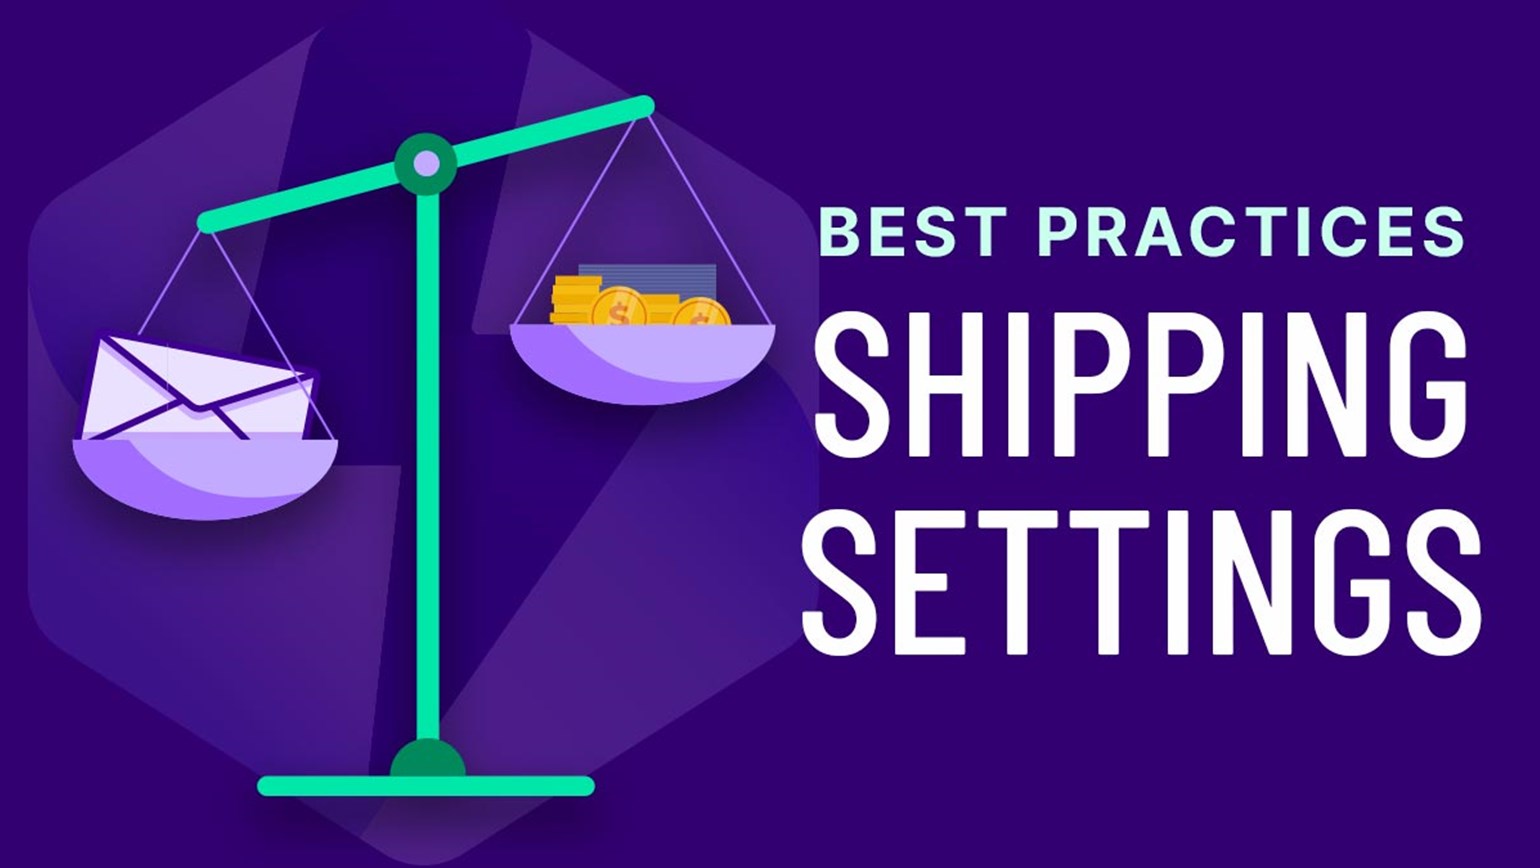 Shipping Settings: Best Practices